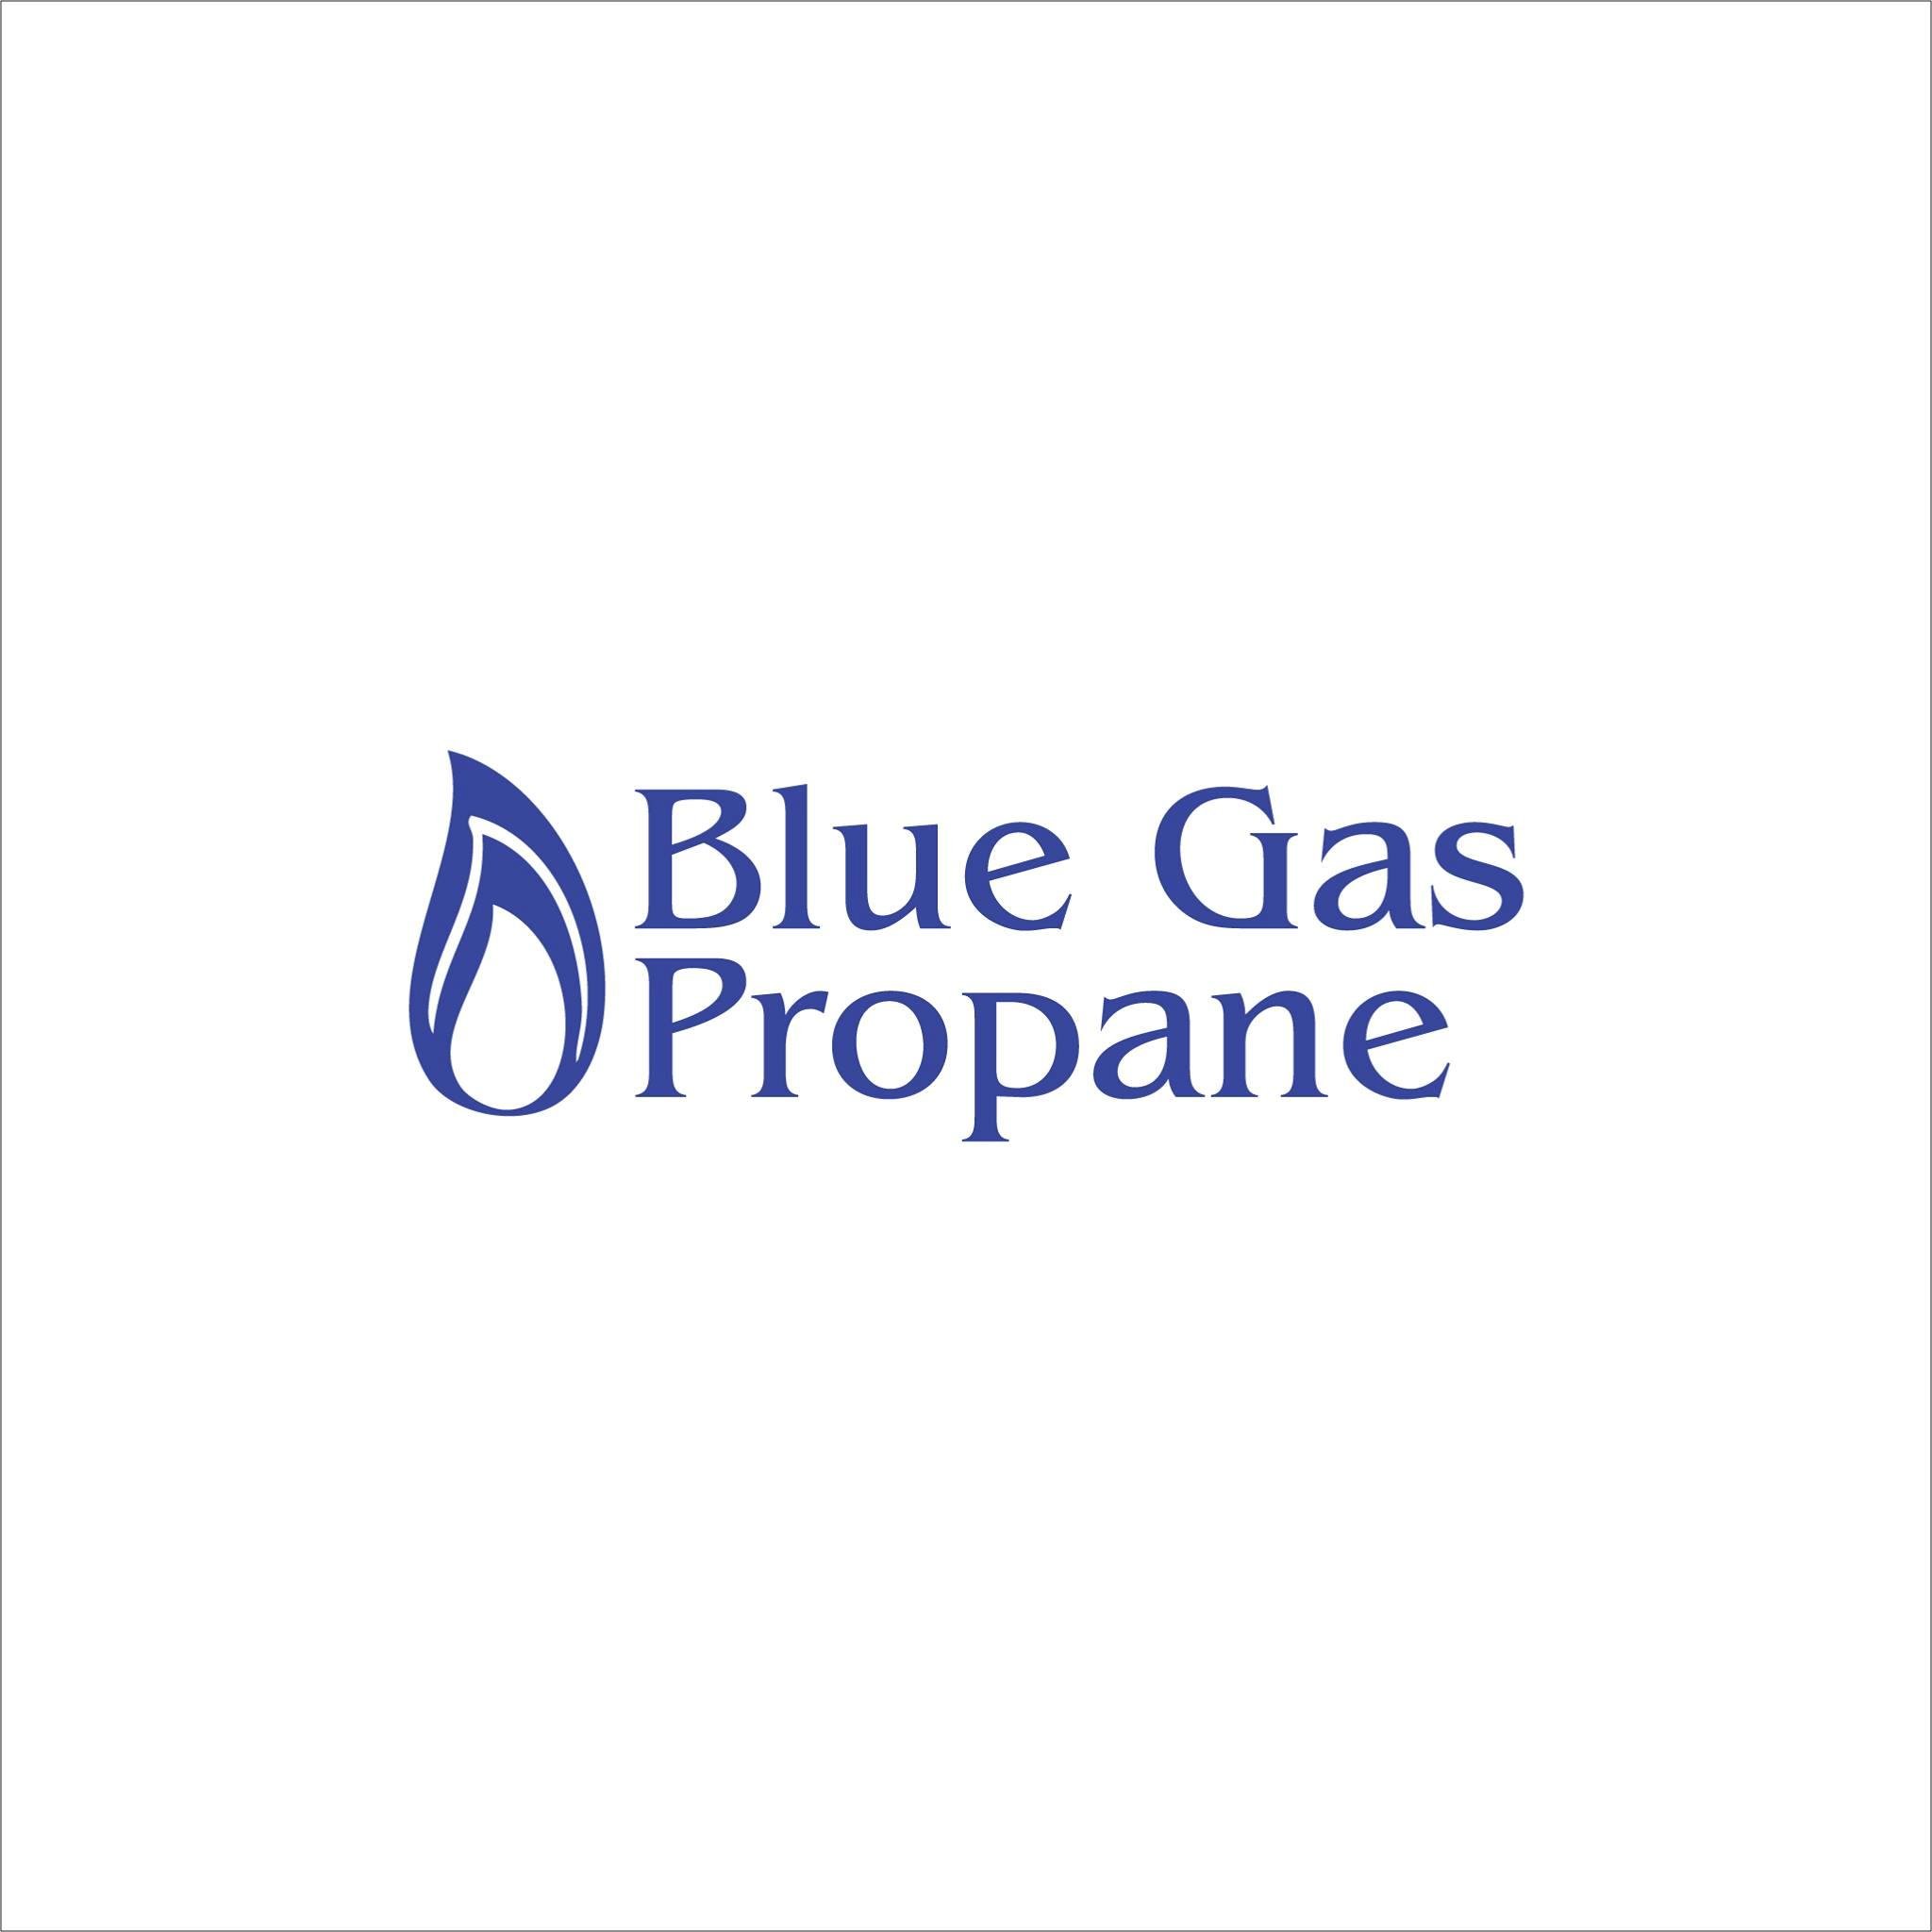 Blue Gas Propane is proud to service the Greater Miami Area . We have serviced this area for over 10 years.